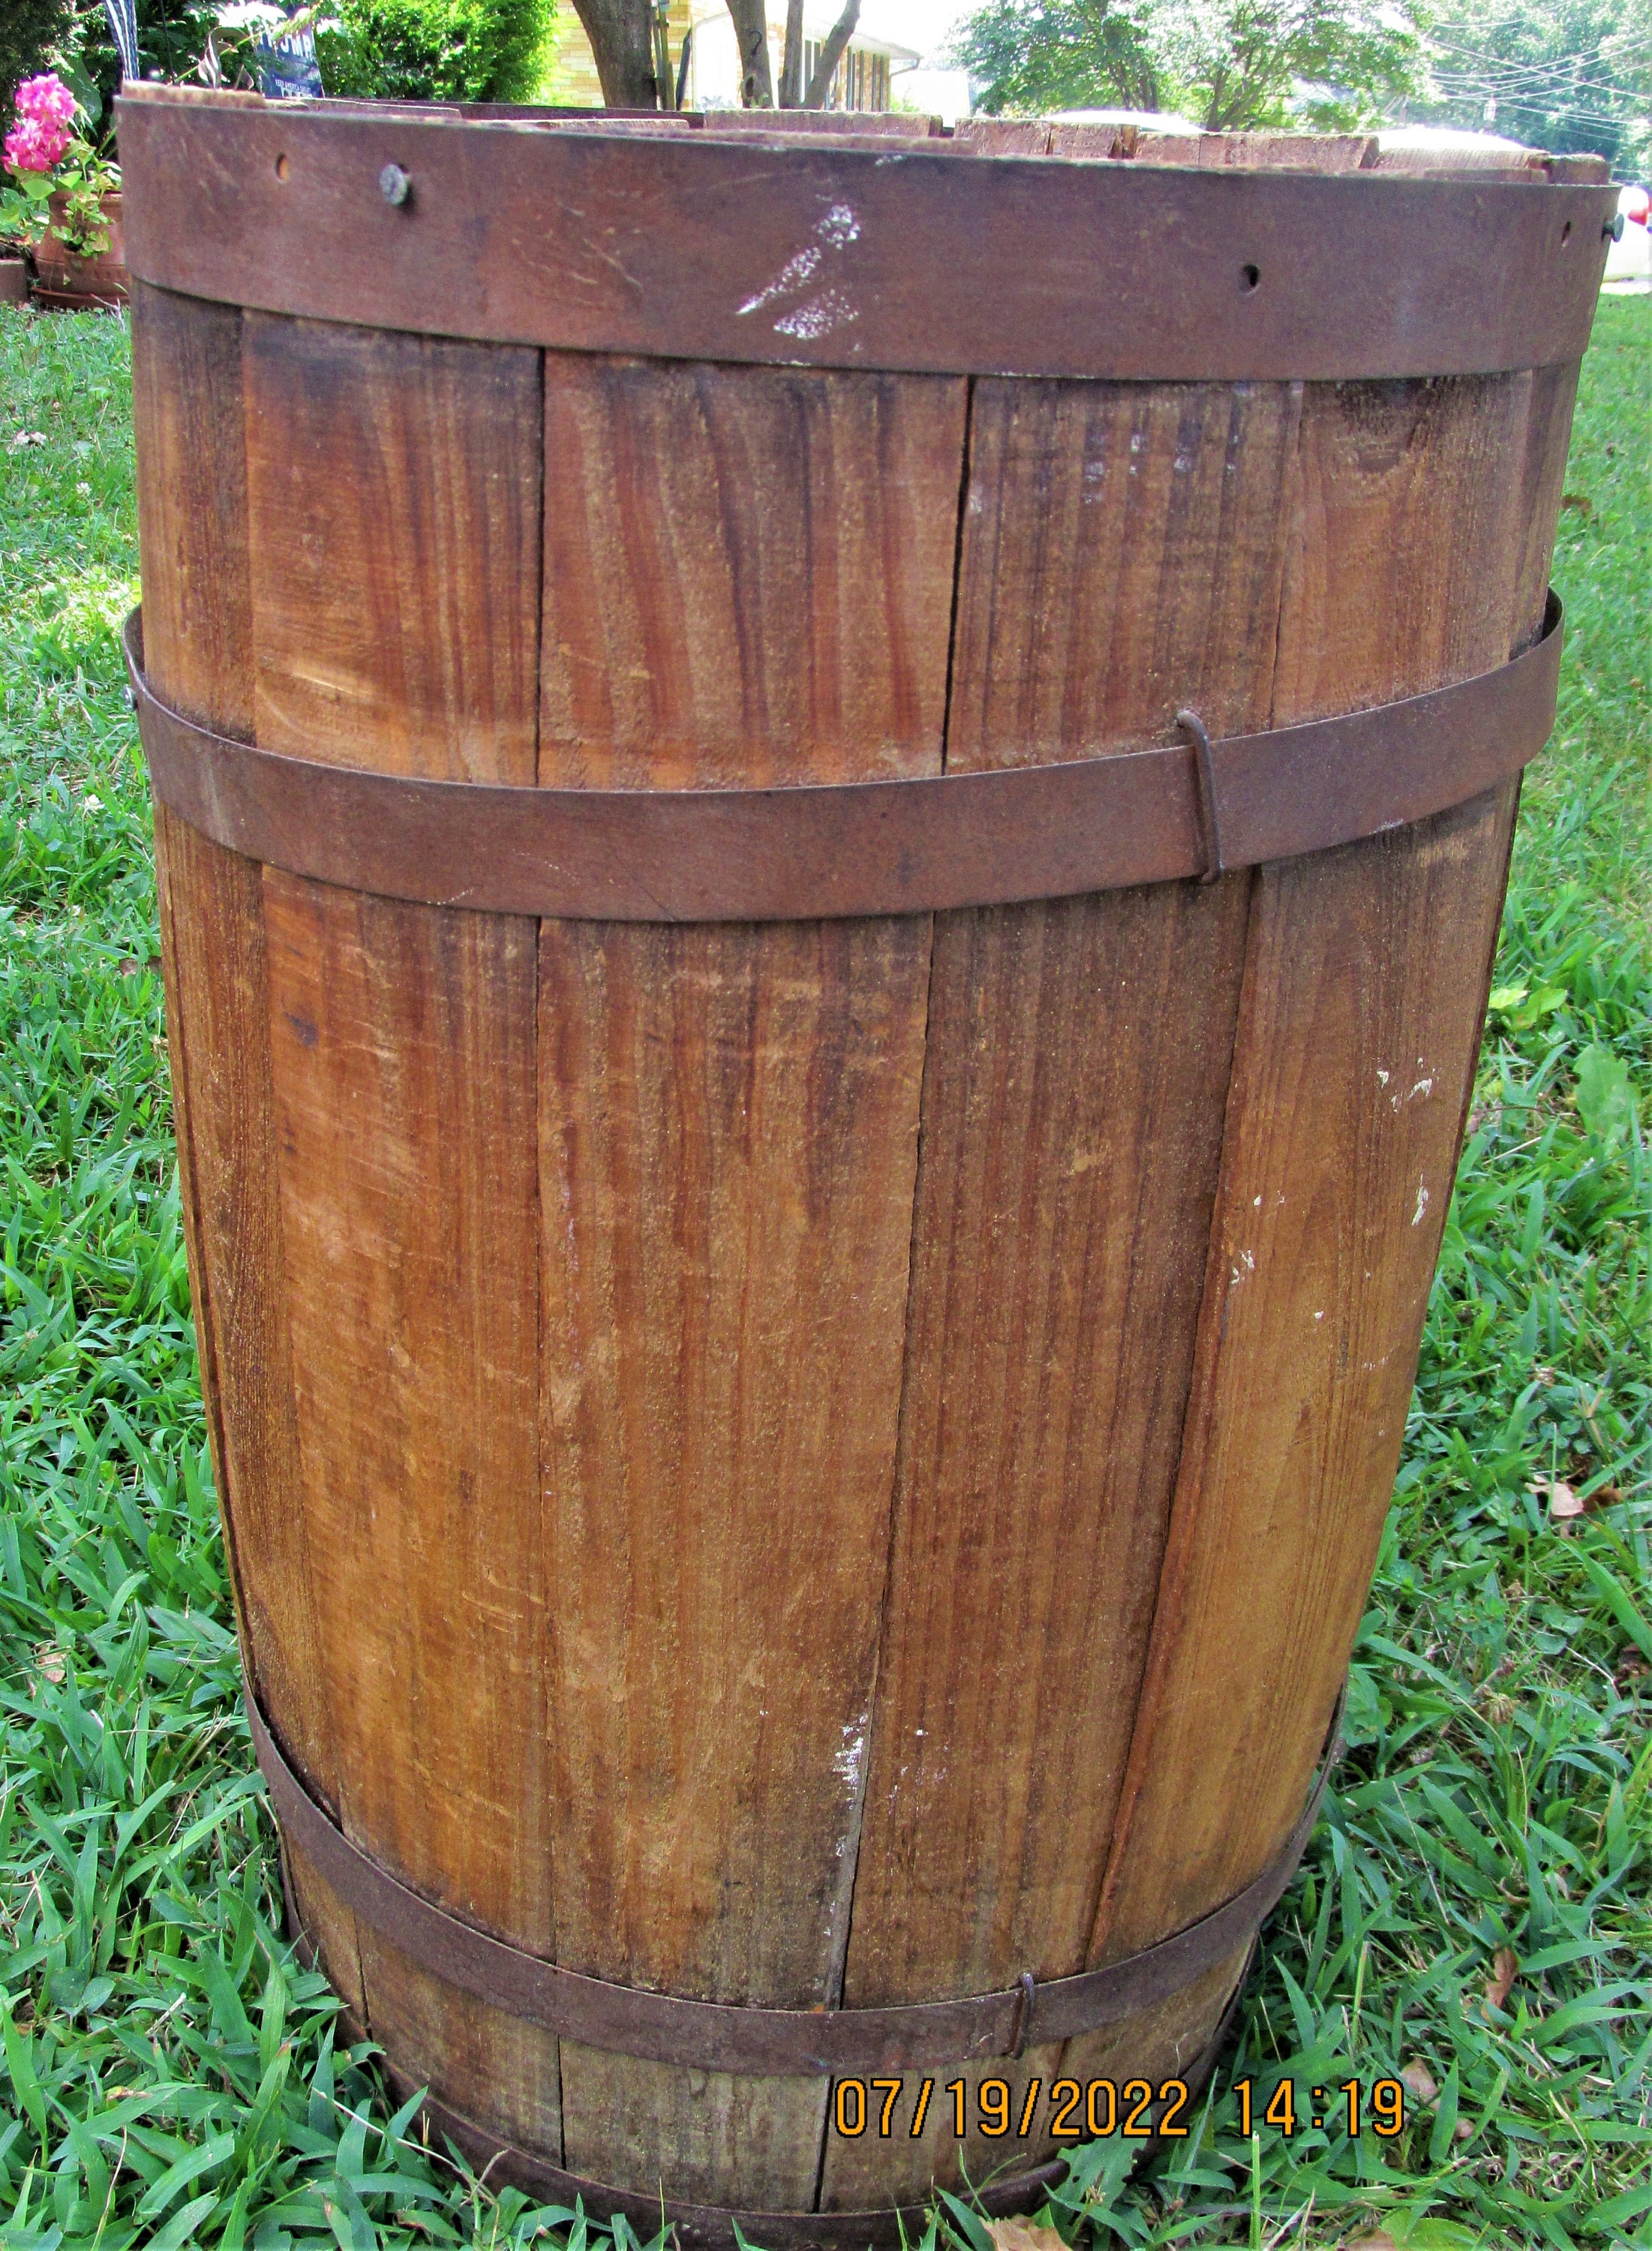 Claeys Old-Fashioned Rustic Pine Wood Multi Use Candy Keg 12.5